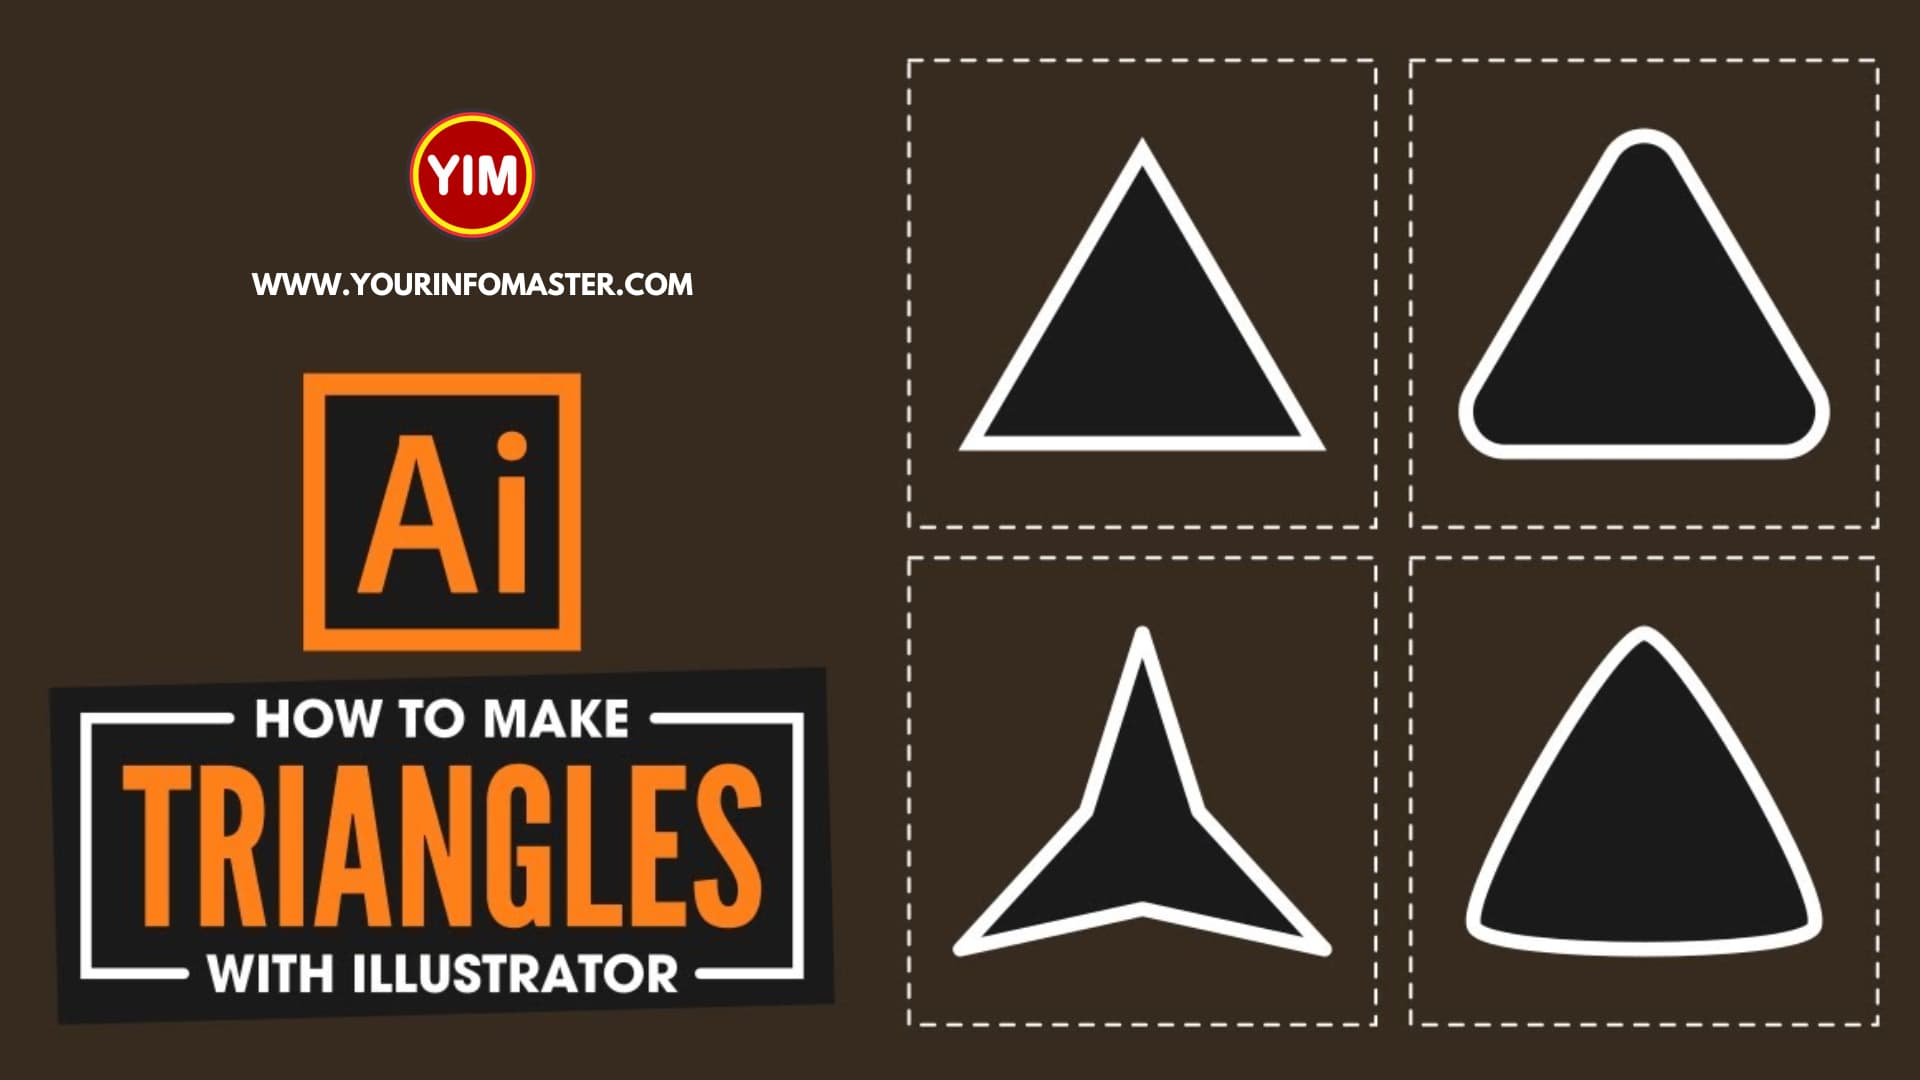 How to make a triangle in Illustrator?: Creating shapes in Adobe Illustrator is an essential skill for any graphic designer.